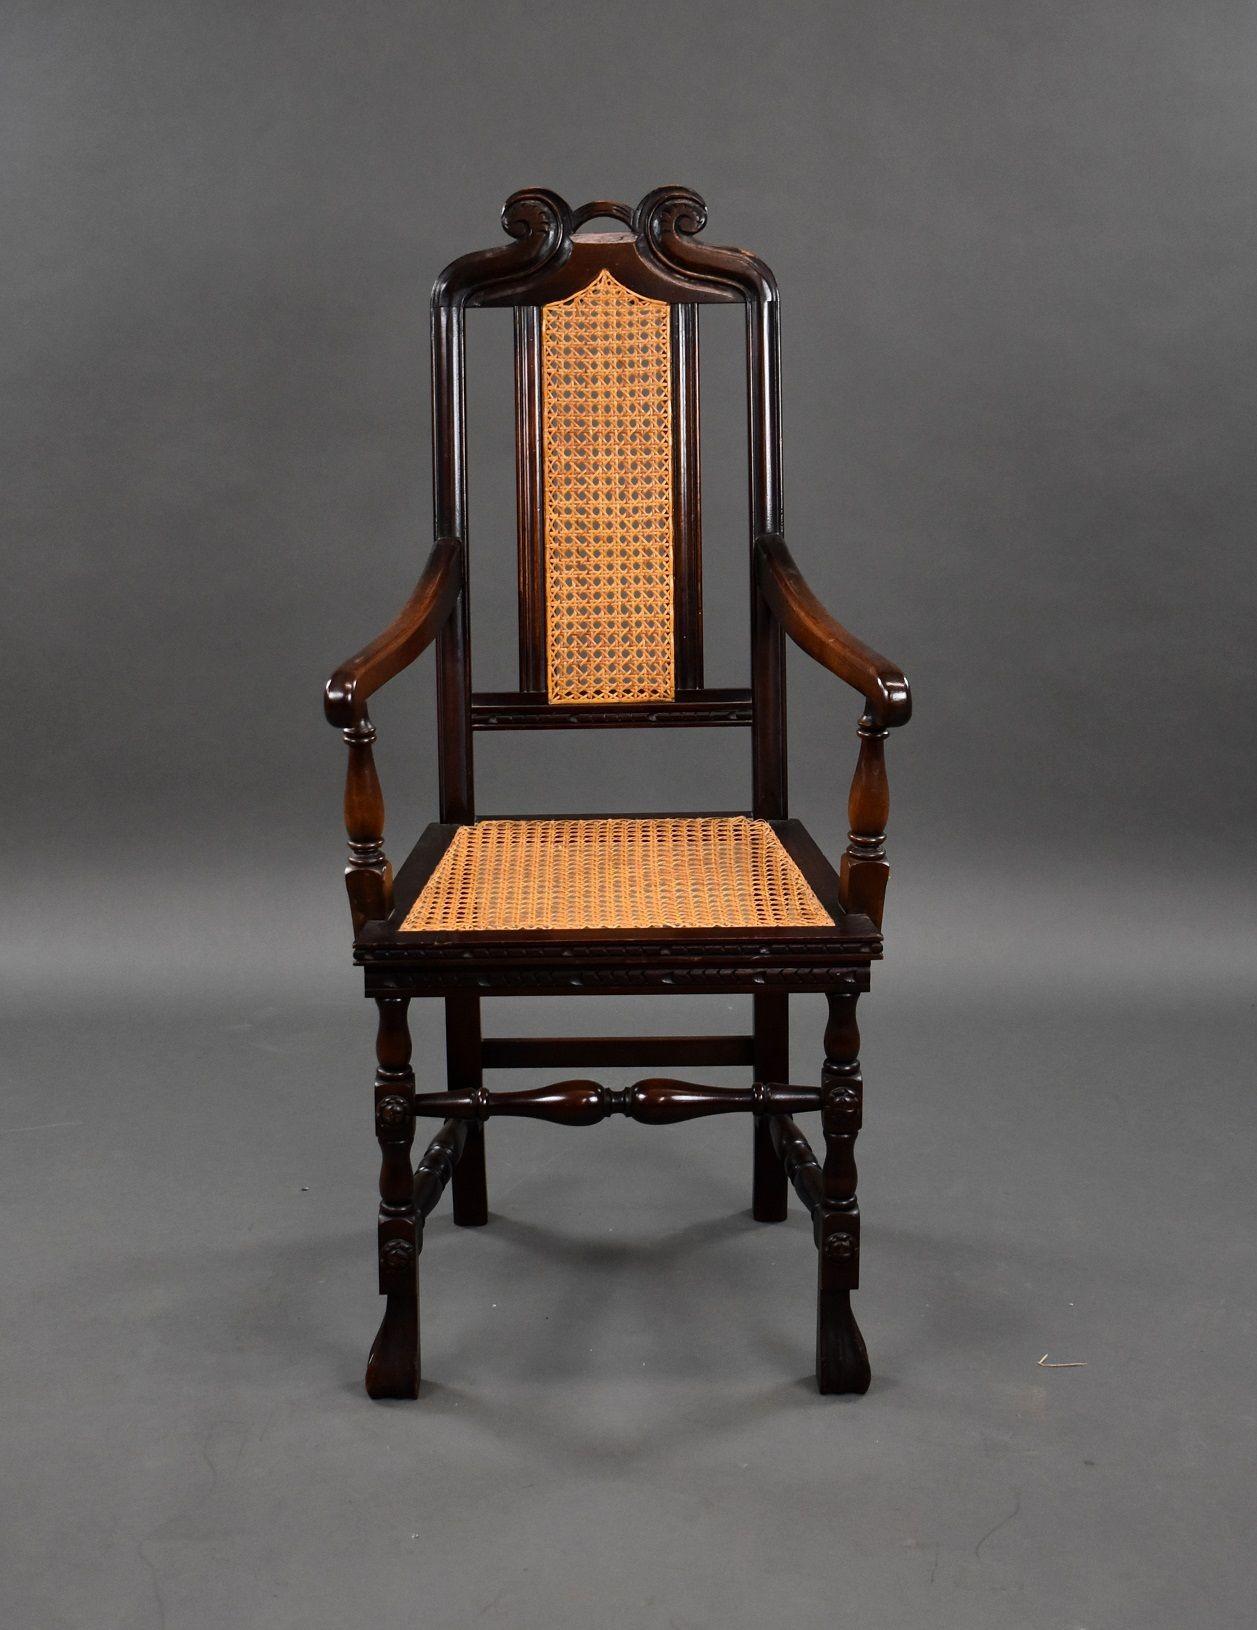 1930s oak armchair with cane weaved seat and back with decorative top supported by stretcher.